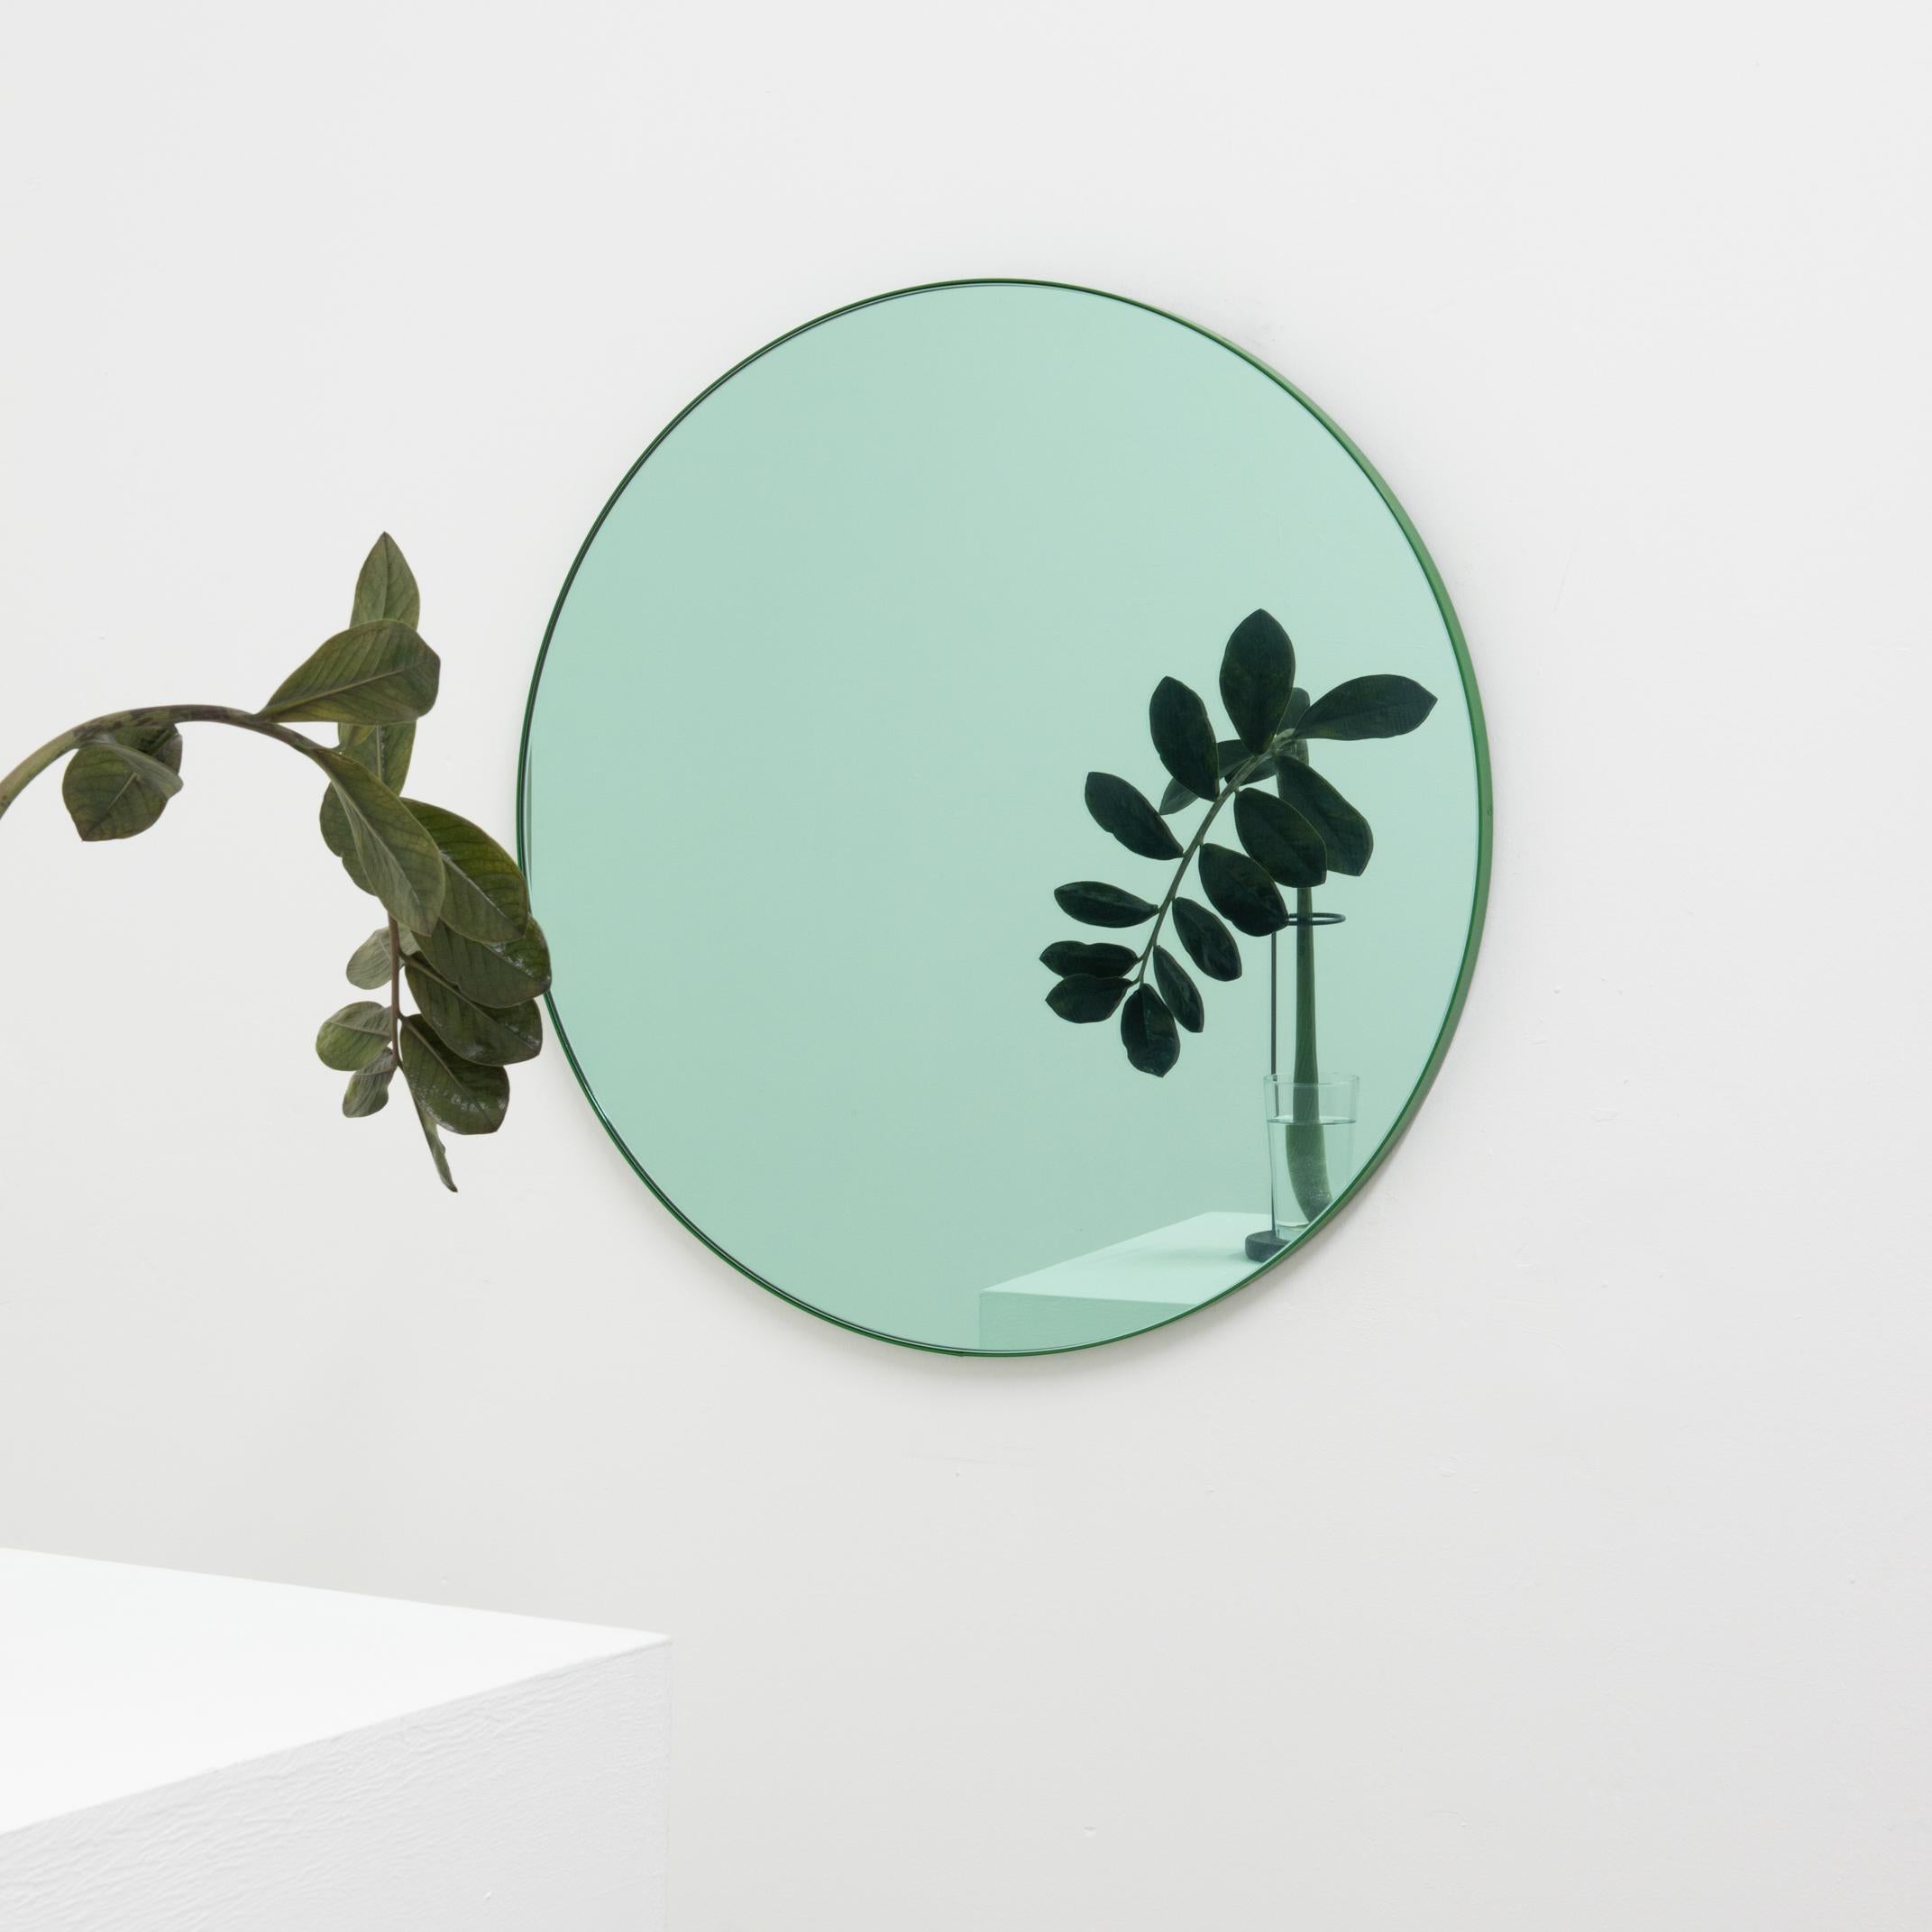 Delightful round green tinted mirror with a colorful green powder coated aluminum frame.

Designed and handcrafted in London, UK. The detailing and finish, including visible brass or green screws, emphasize the craft and quality feel of the mirror,